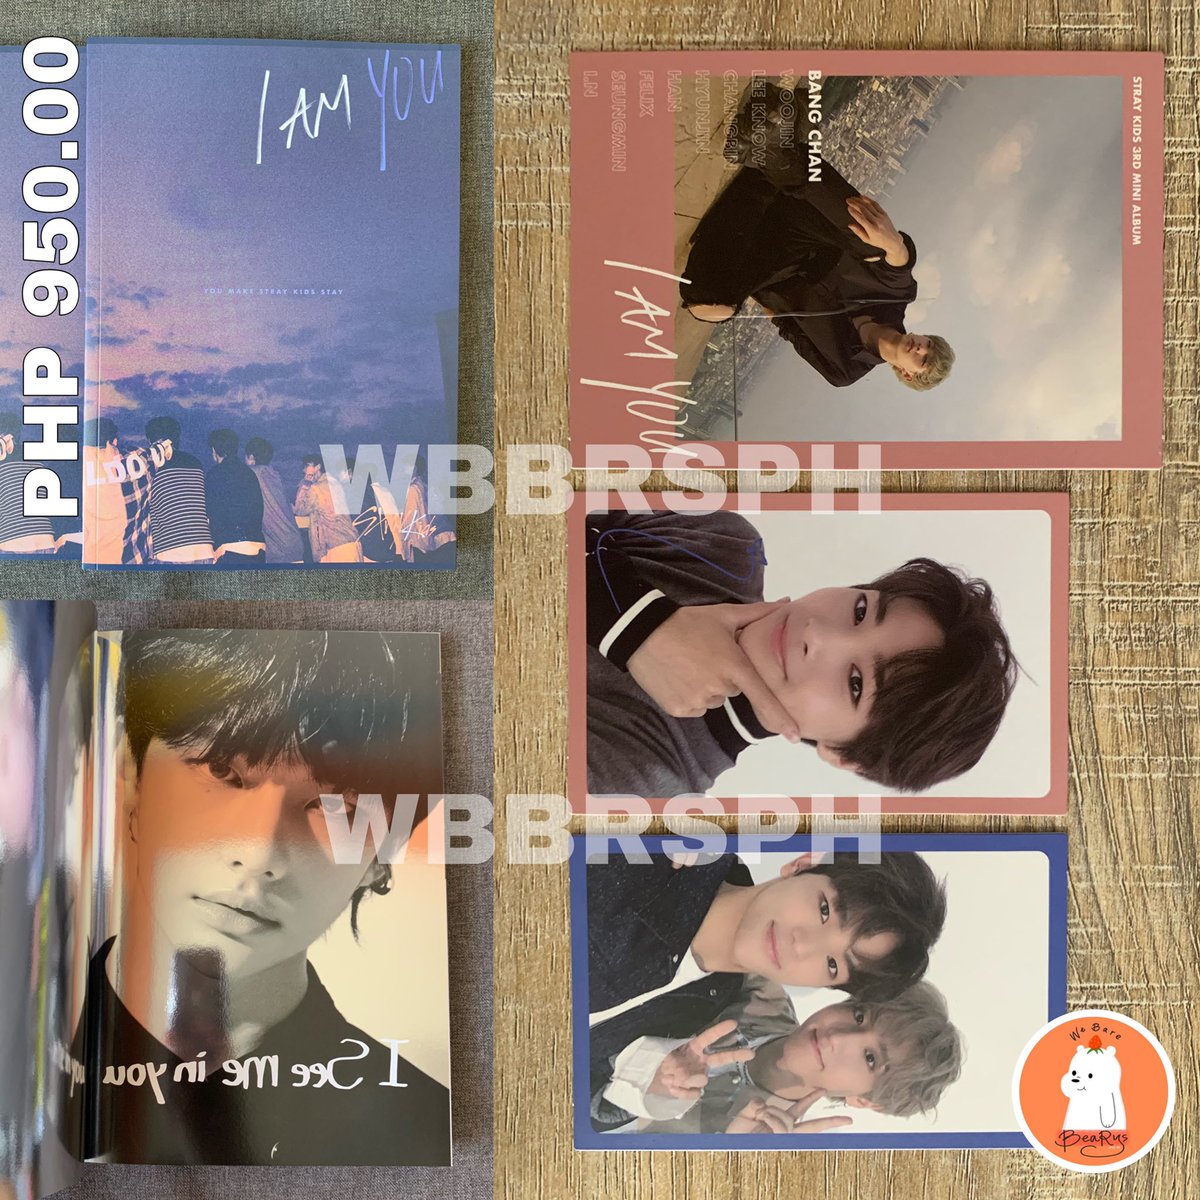  #WBBRSPH_OnhandSKZ I AM YOU SETS (BLUE VER)Check prices on picSet 1 (1st pic)- Hyunjin page- Bangchan pola, IN pb pc, kwj+han unitSet 2 (2nd pic)- Felix page- kwj pola, Felix pb pc, kwj+felix unitSet 3 (3rd pic)- Changbin page - Minho pola, Changbin pb pc, bc+cb